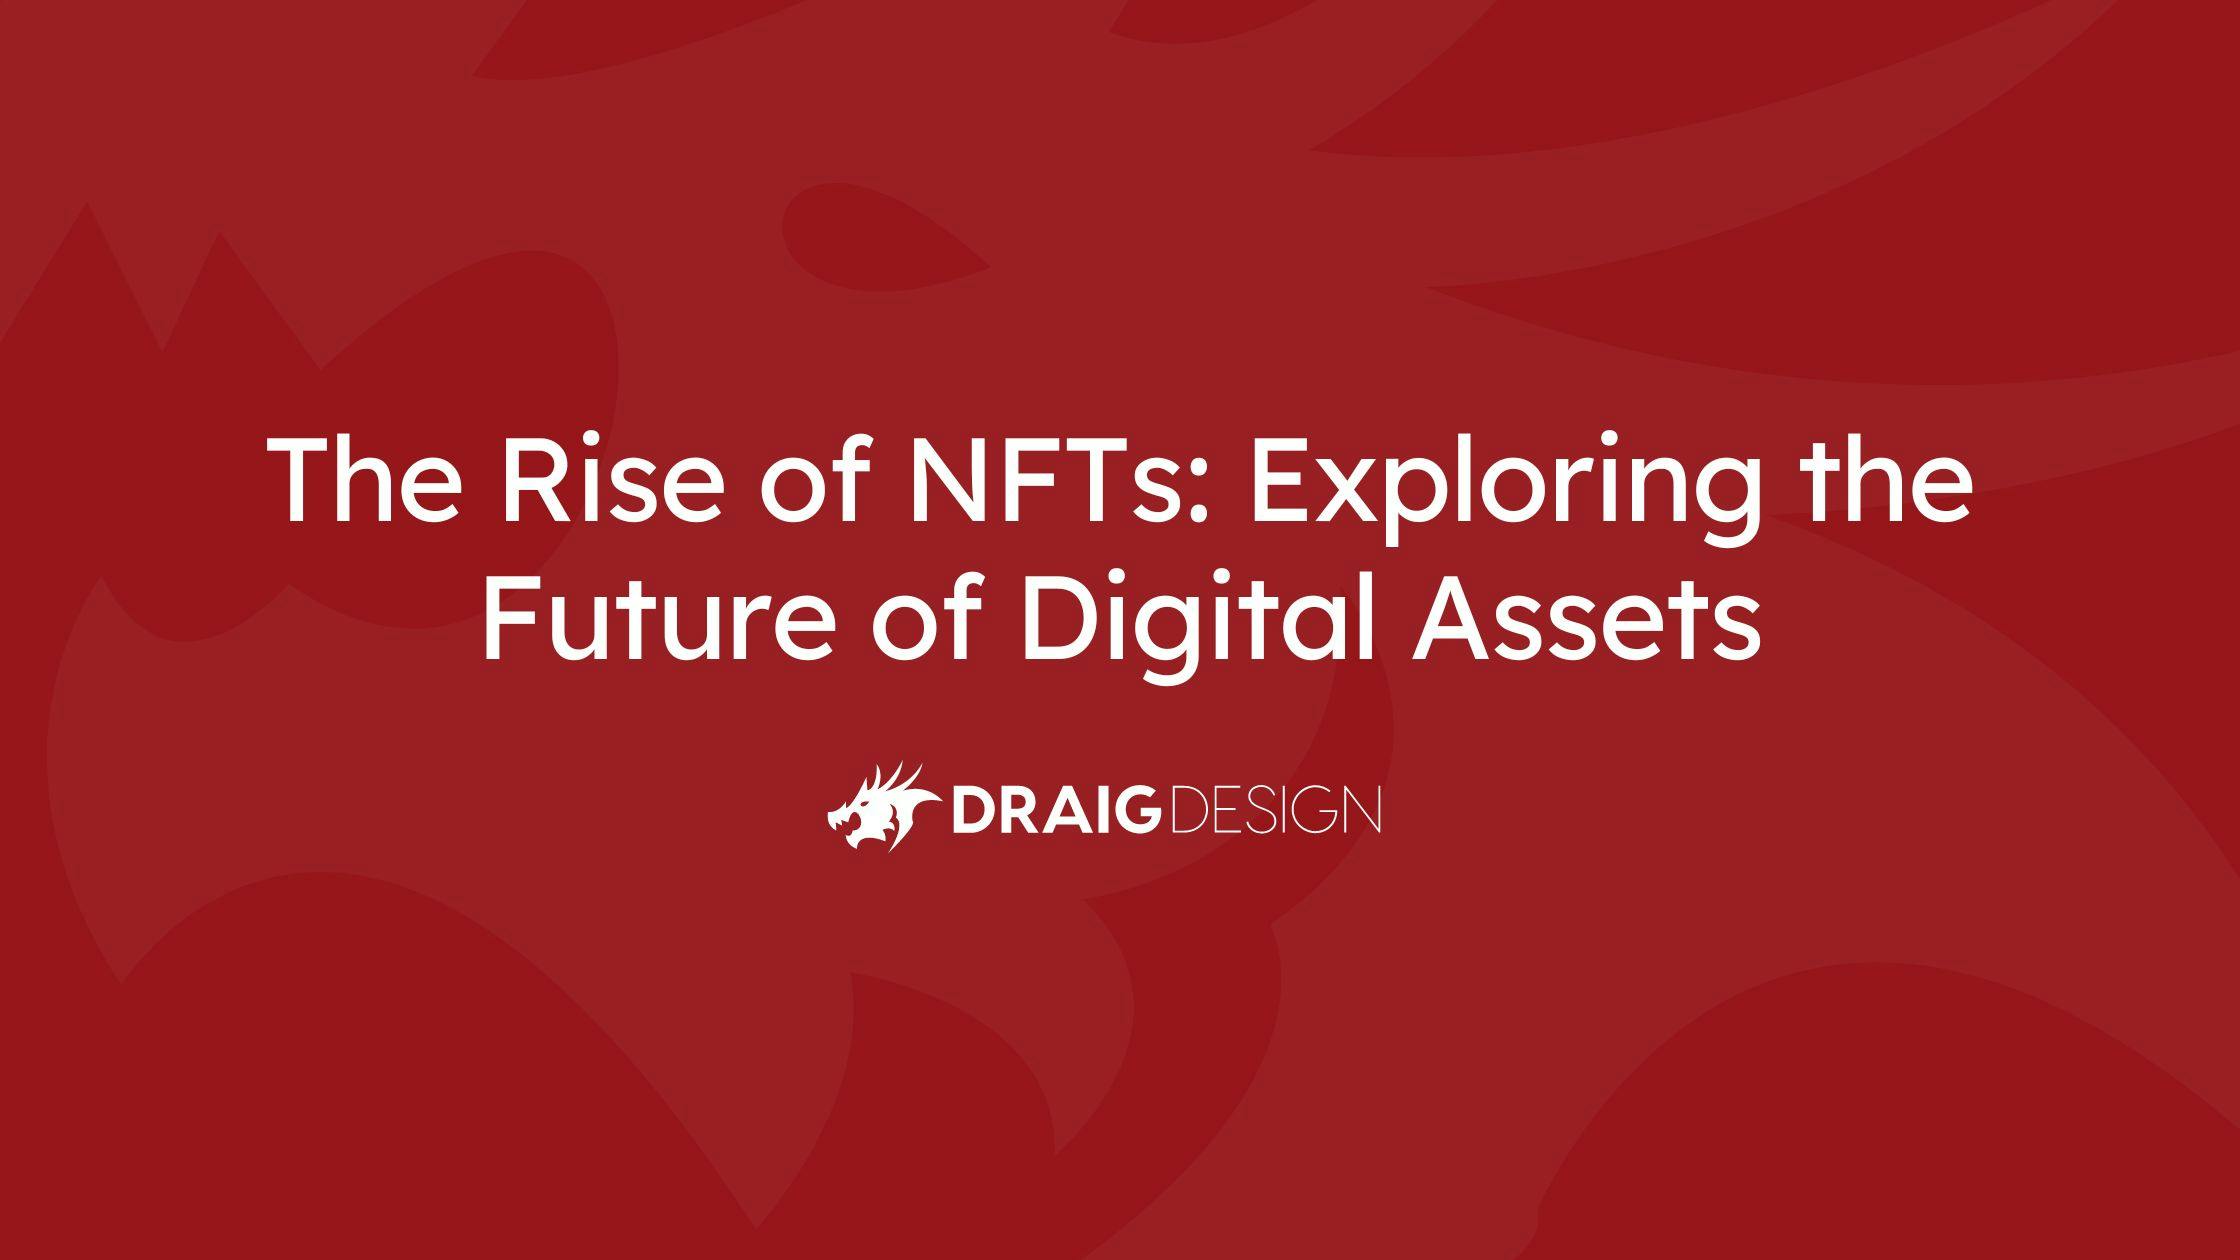 The Rise of NFTs: Exploring the Future of Digital Assets